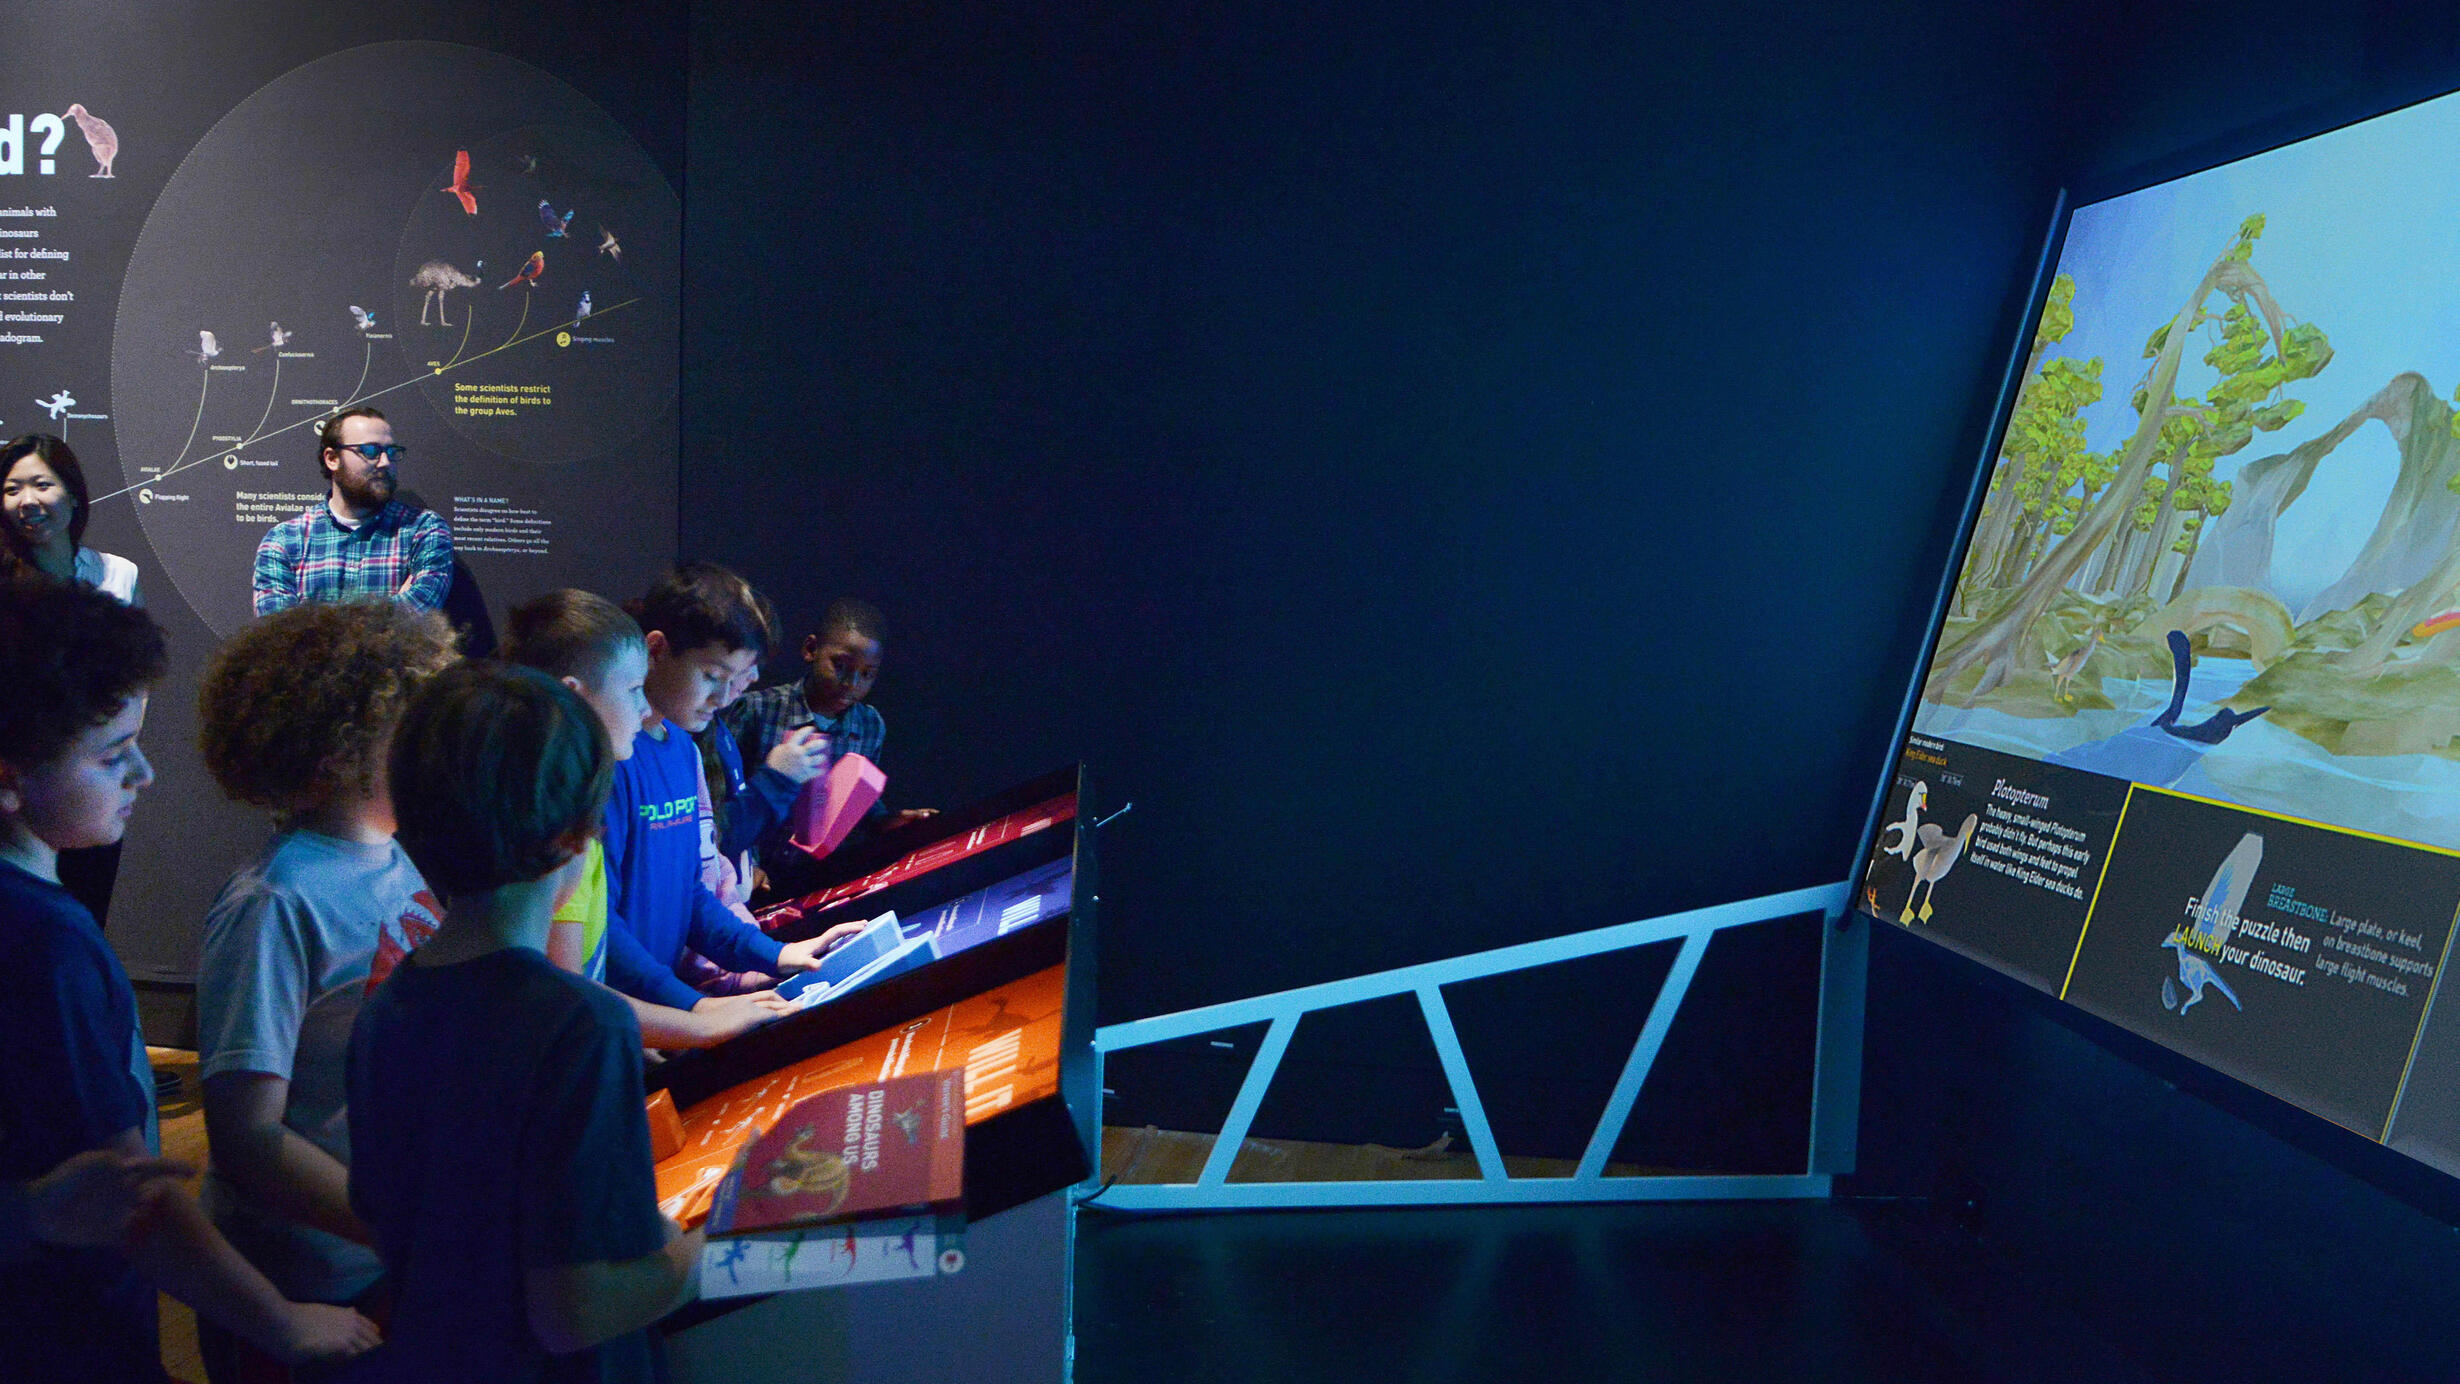 Eight children stand in front of an interactive digital display at the Dinosaurs Among Us exhibit, with two adults standing to the side.